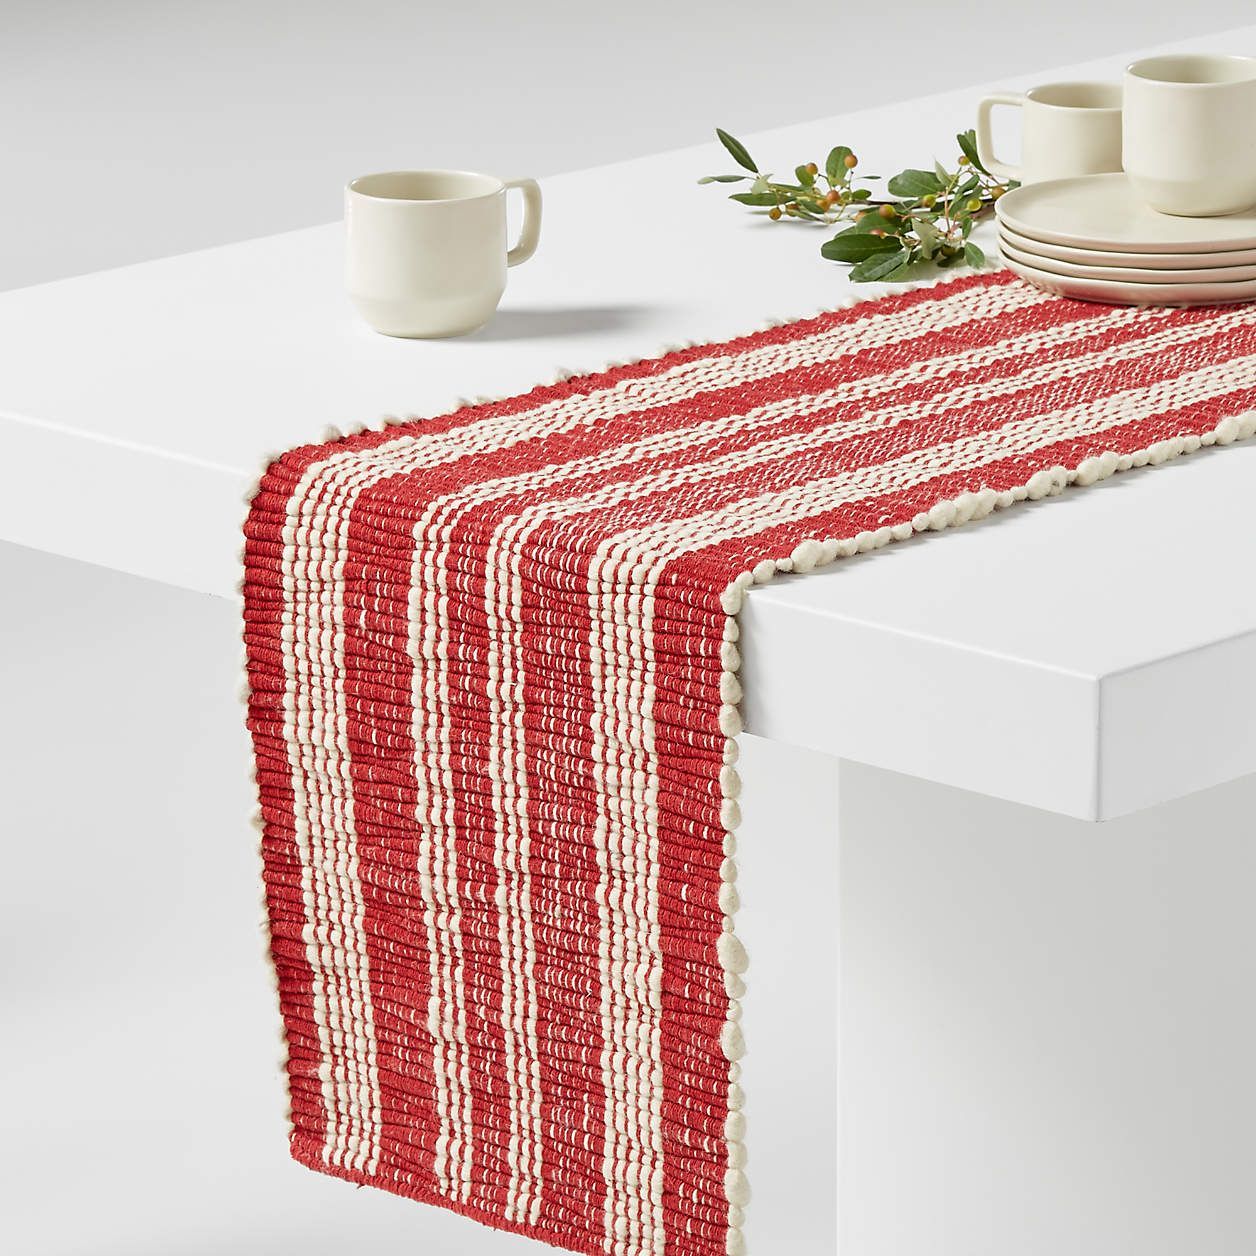 YEHO Art Gallery Simple Star Christmas Pattern Cotton Linen Table Runner Dinning,Washable Table Runners for Holiday Party Kitchen Coffee Table,18x72 Inch 